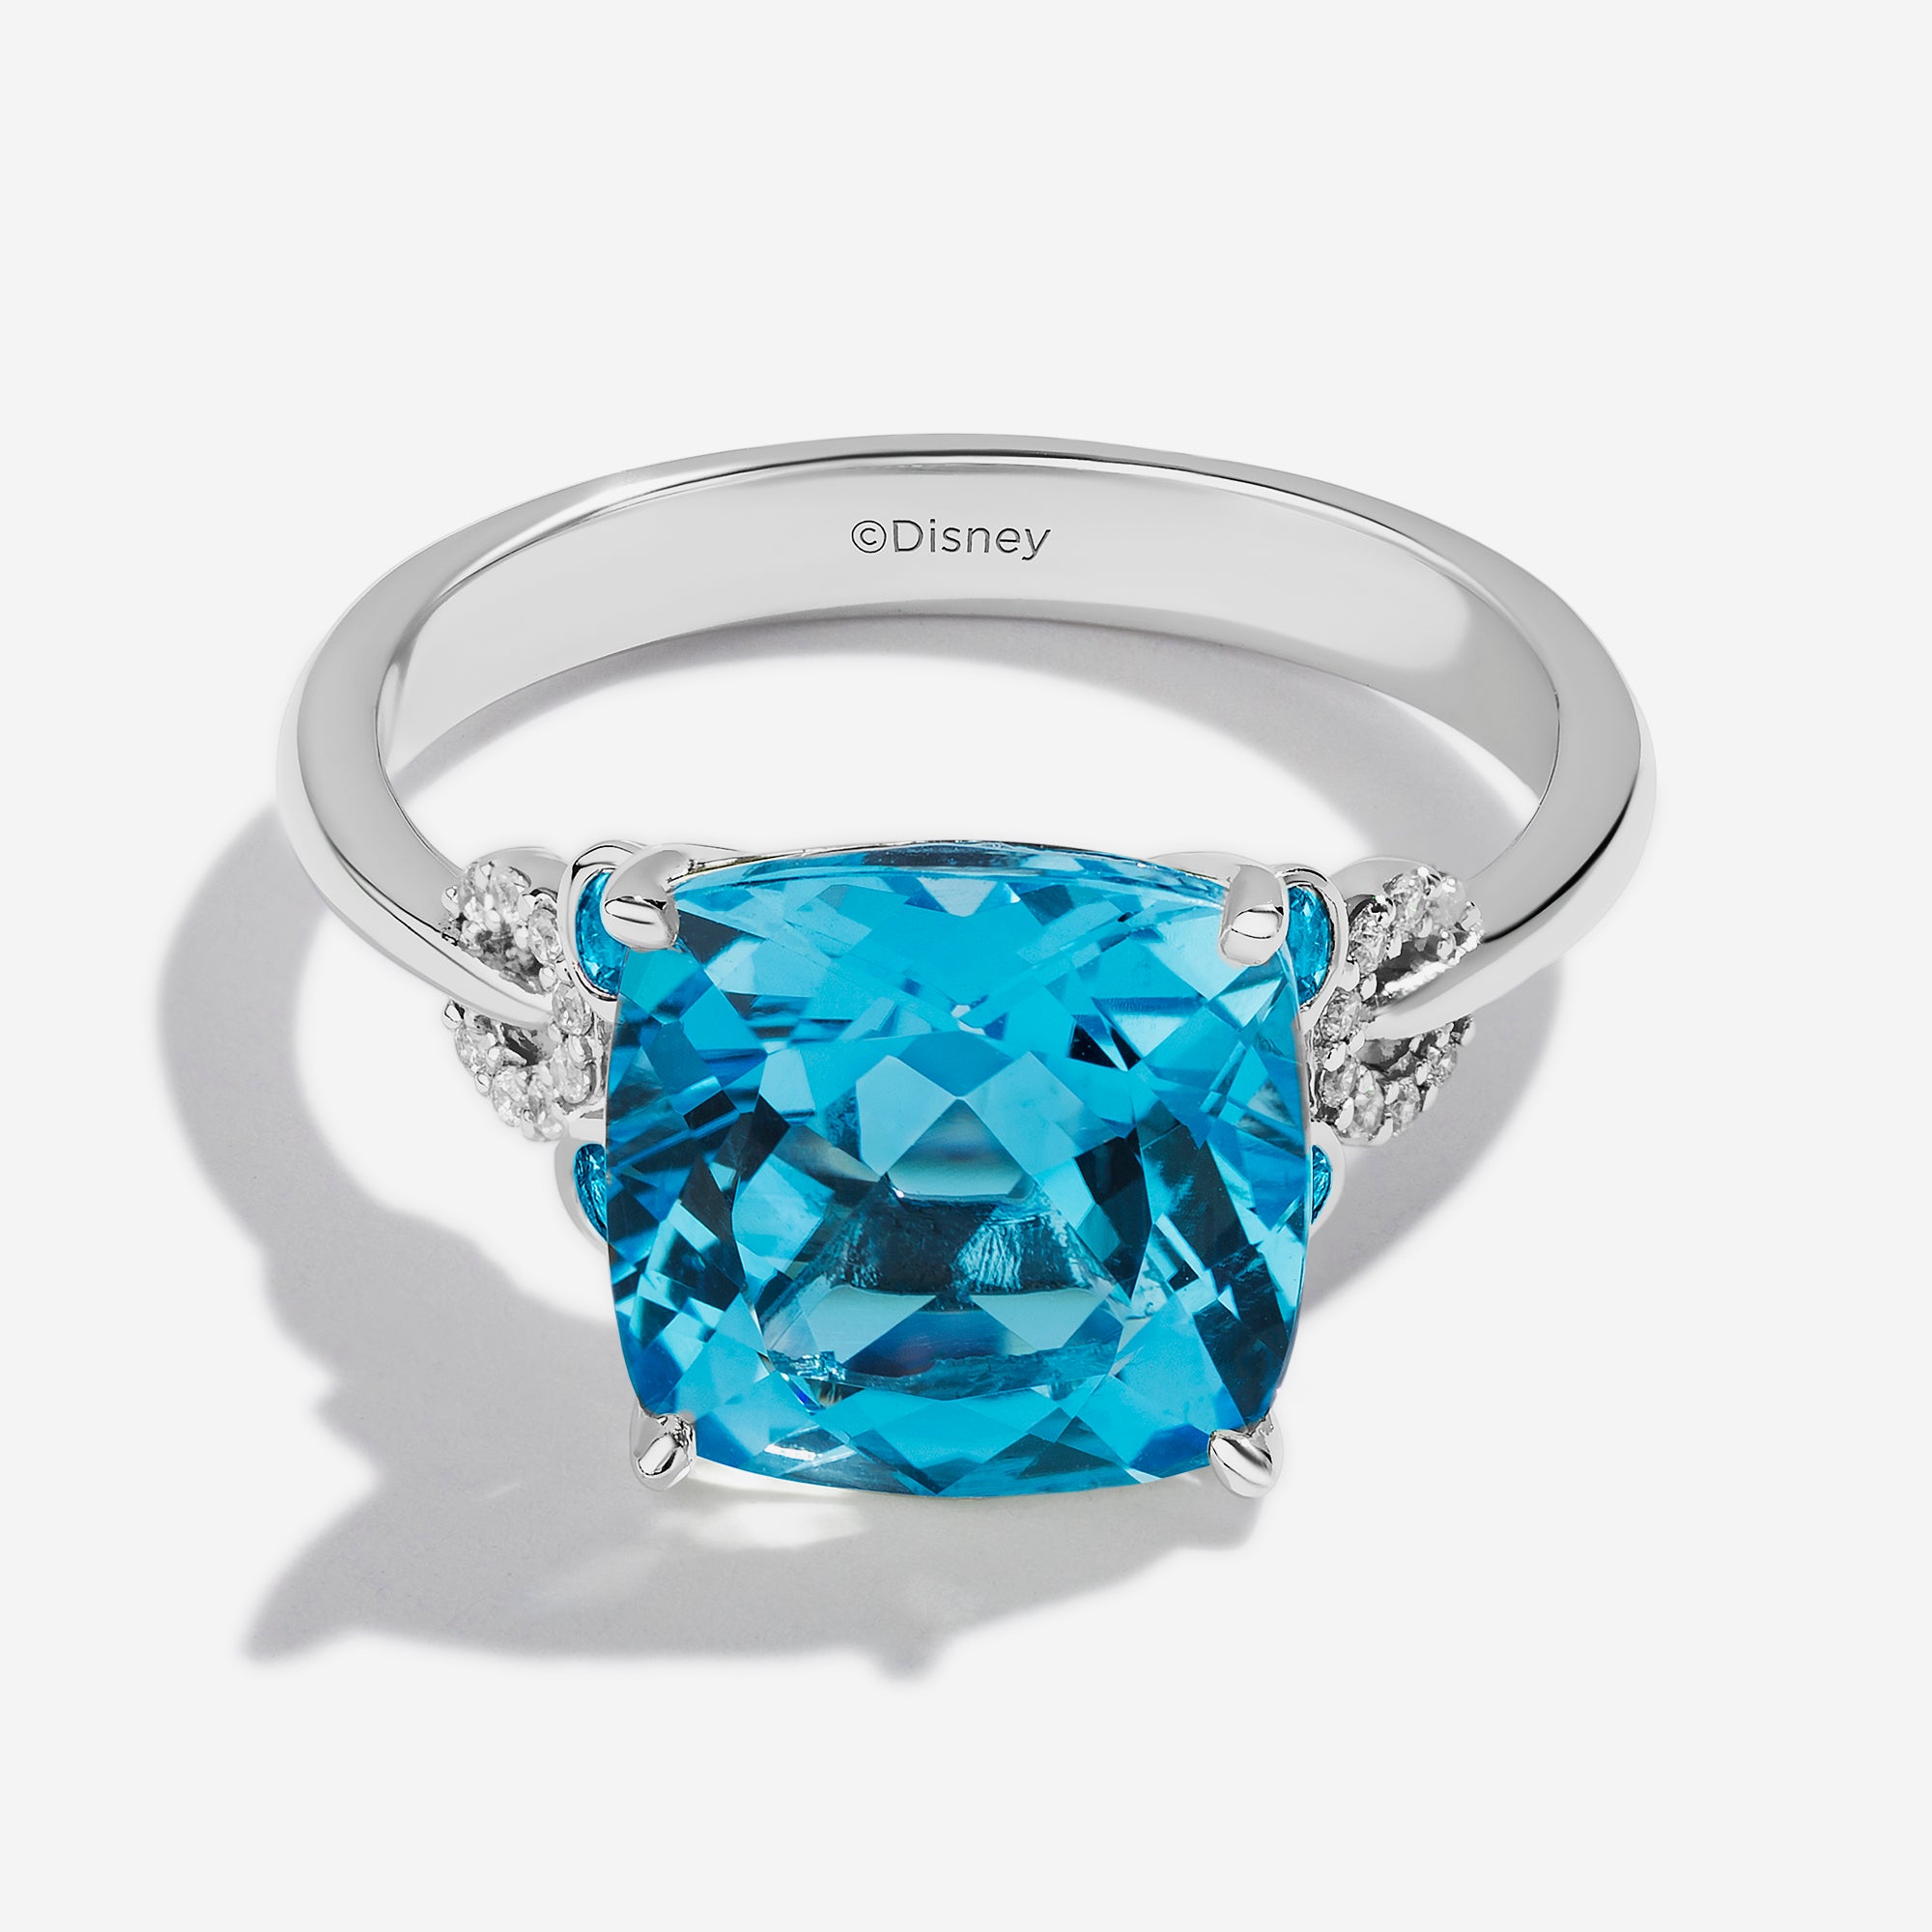 Mickey Mouse Blue Topaz Cocktail Ring with 1/10 CTTW Diamonds